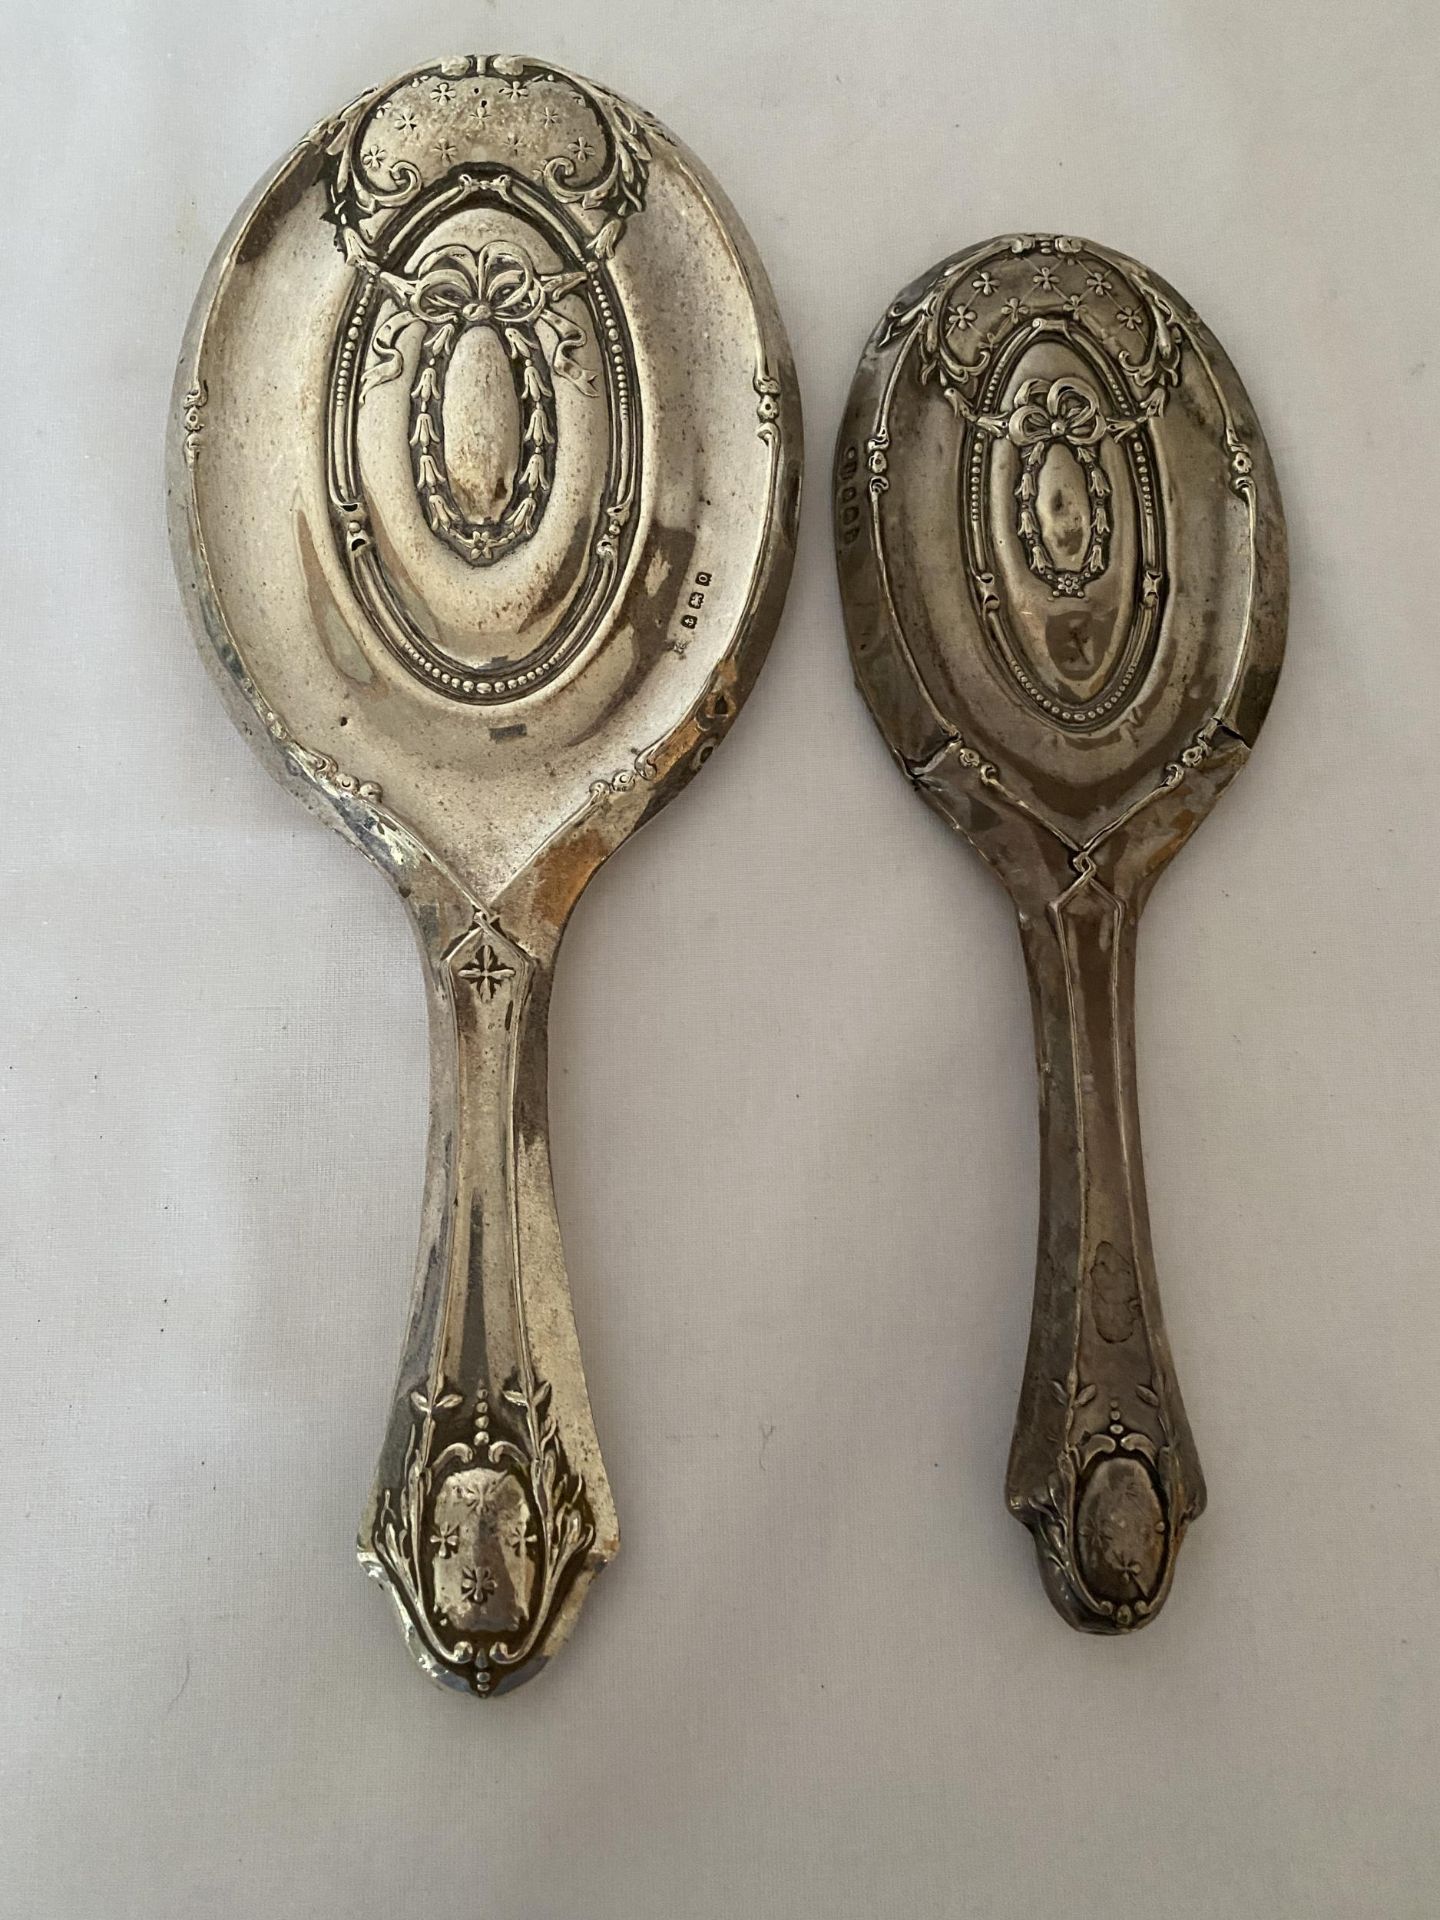 TWO HALLMARKED BIRMINGHAM SILVER BACKED HAND MIRRORS, EARLIEST DATING TO 1913 - Image 2 of 18